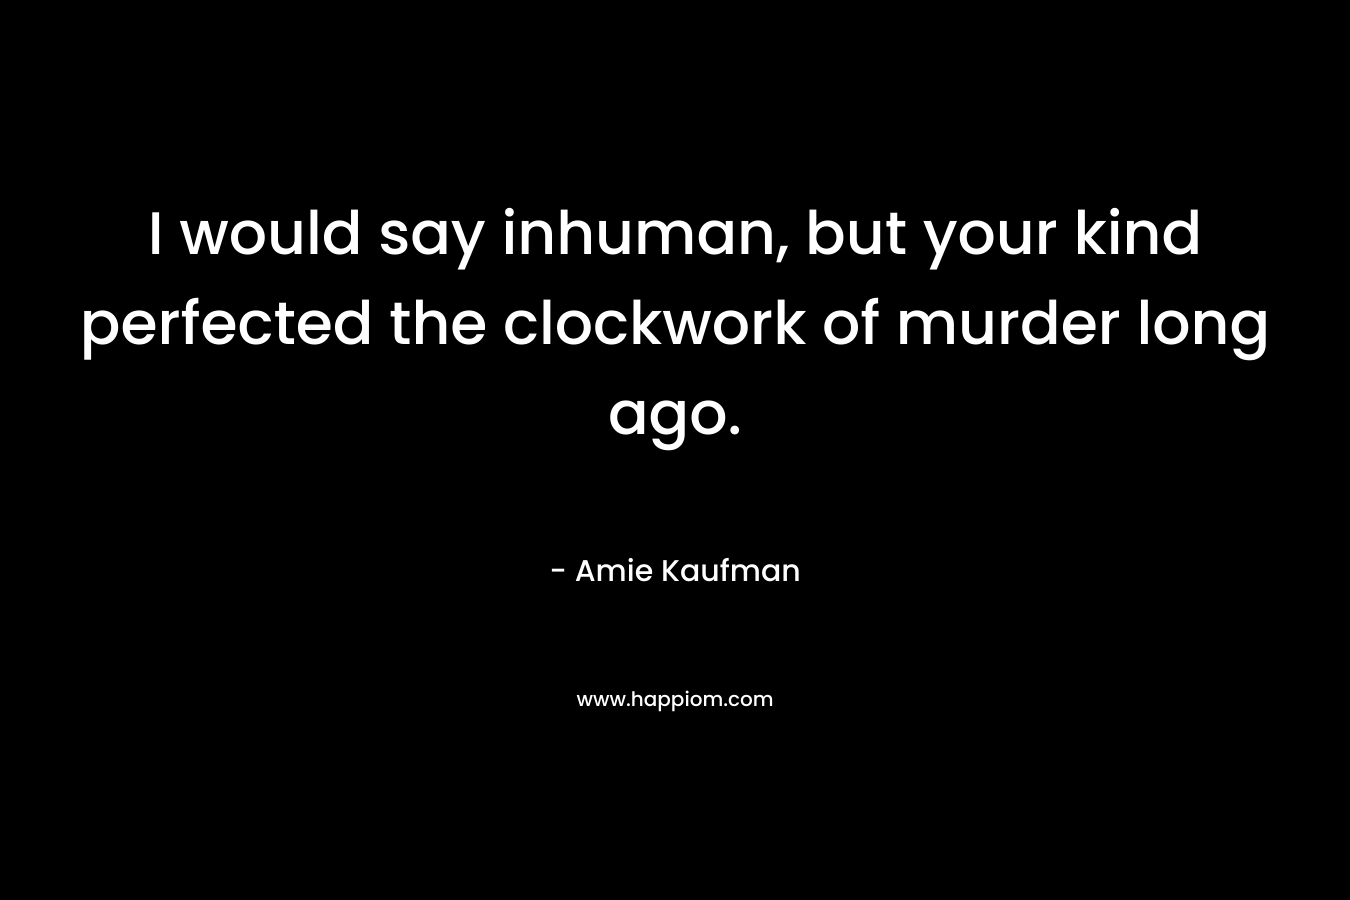 I would say inhuman, but your kind perfected the clockwork of murder long ago.